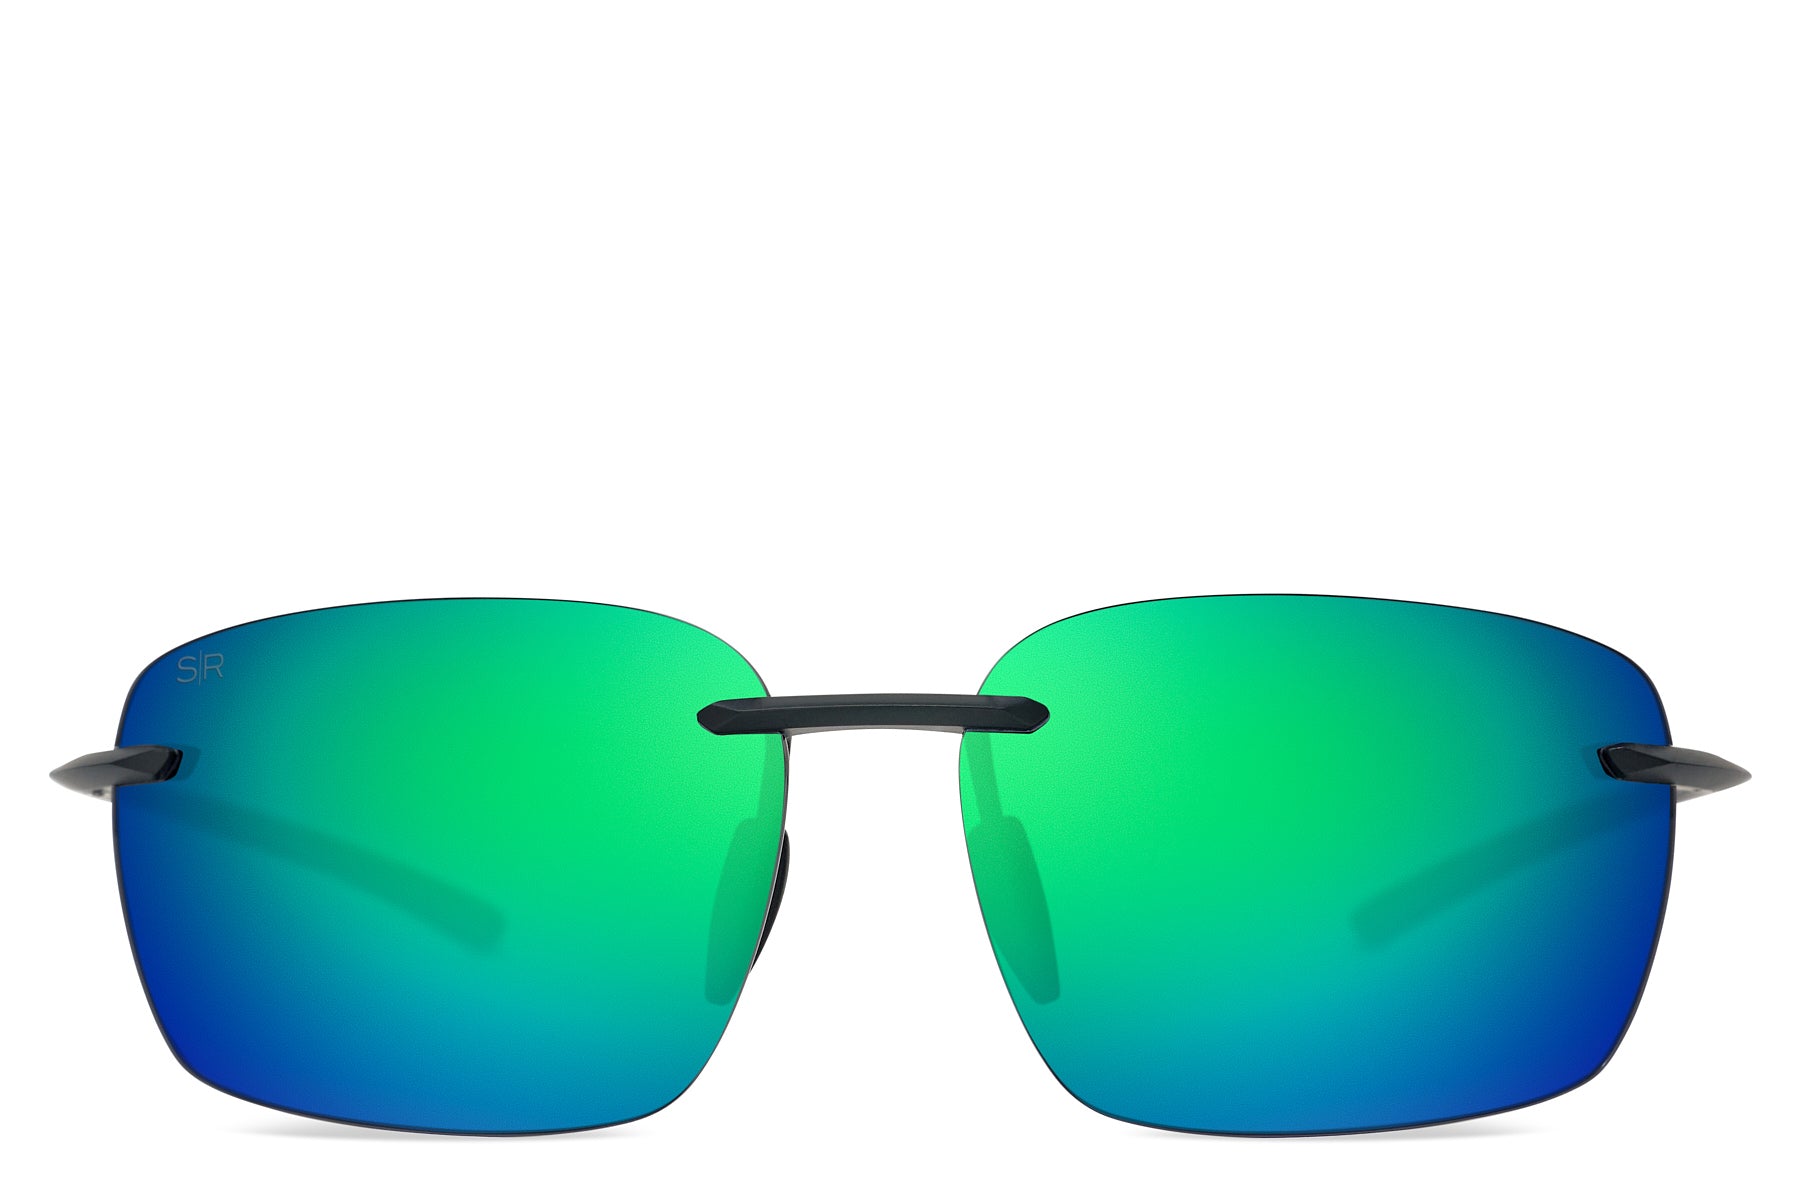 Buy EASTON FLARE Sunglasses, Silver, UV Protective Lenses, Shatter-Resistant  Lenses Online at Lowest Price Ever in India